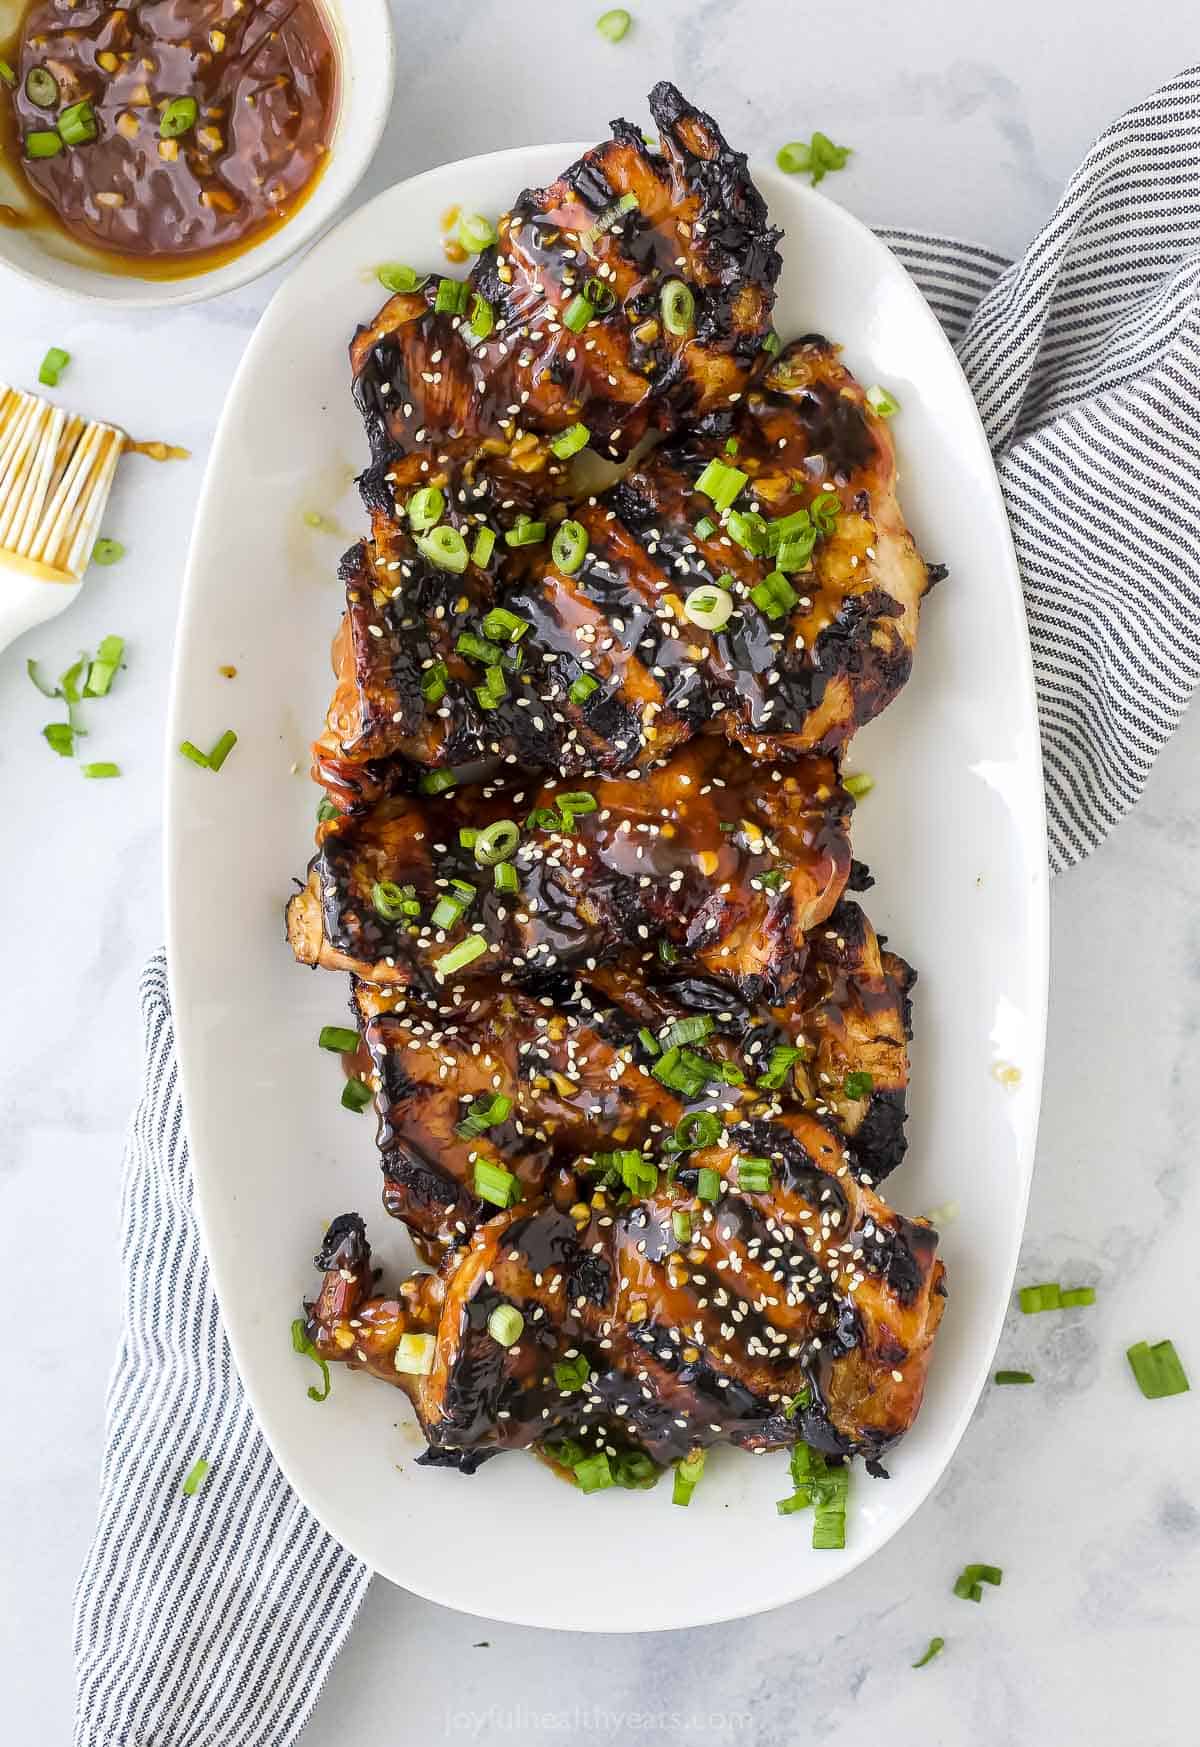 A platter full of teriyaki grilled chicken thighs on top of a striped kitchen towel